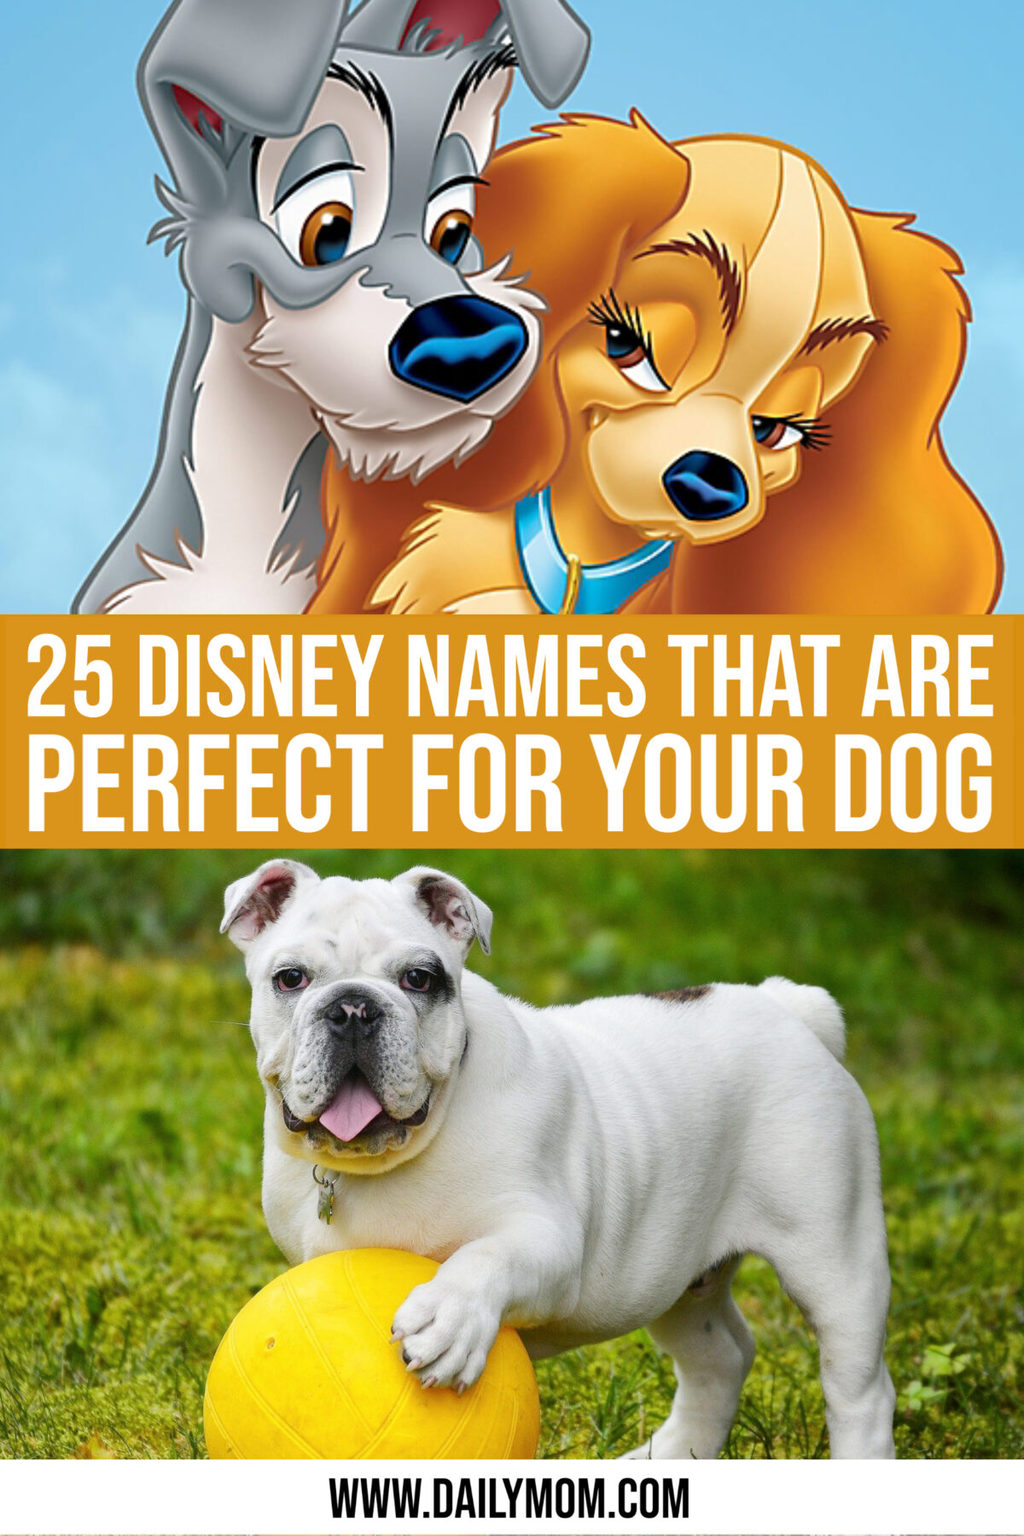 25 Underrated Disney Names For Dogs You\'ll Definitely Want to Use ...